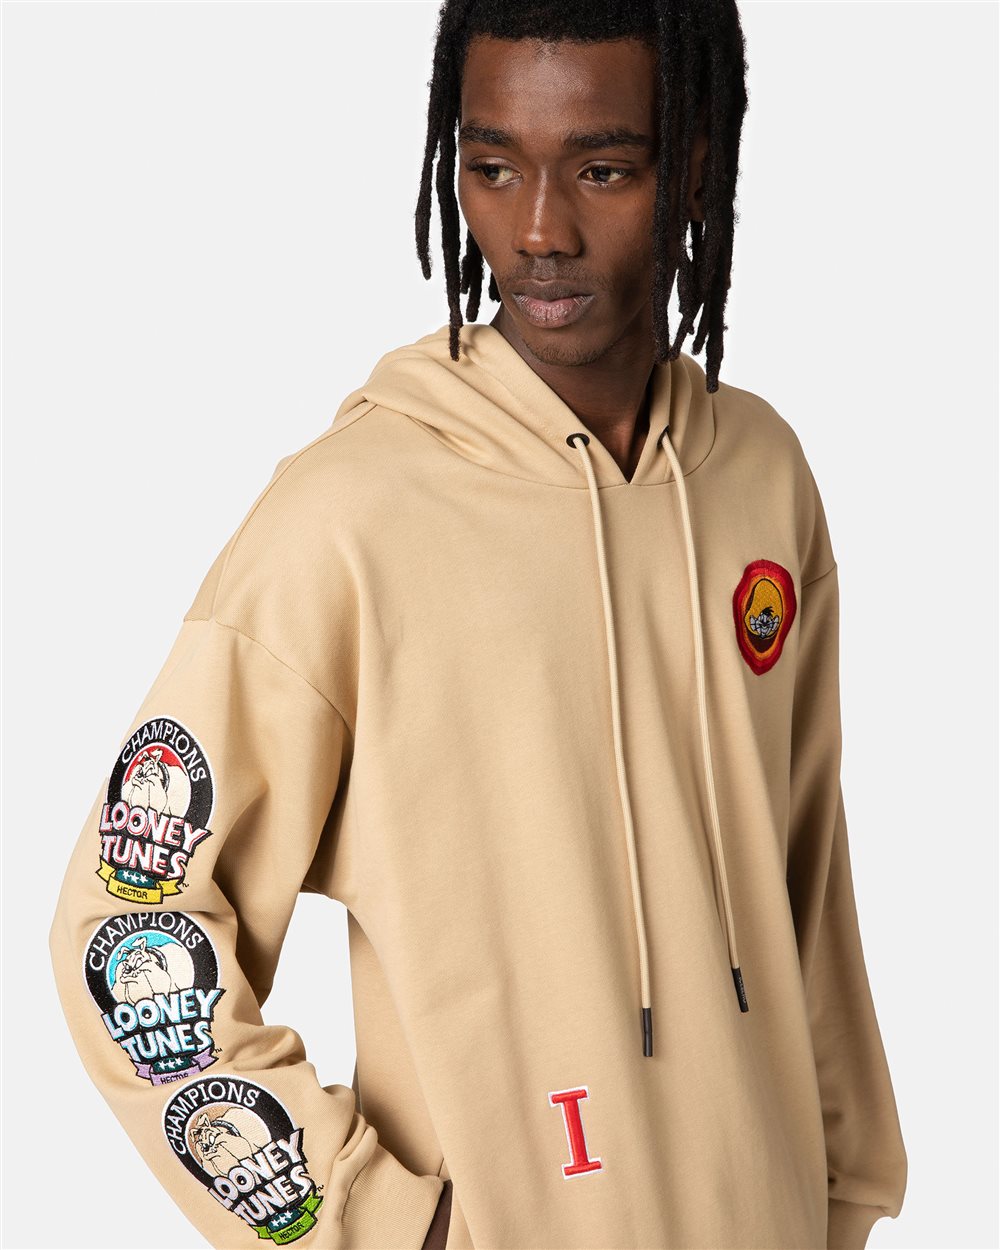 Hooded Looney Tunes sweatshirt Iceberg patches with |